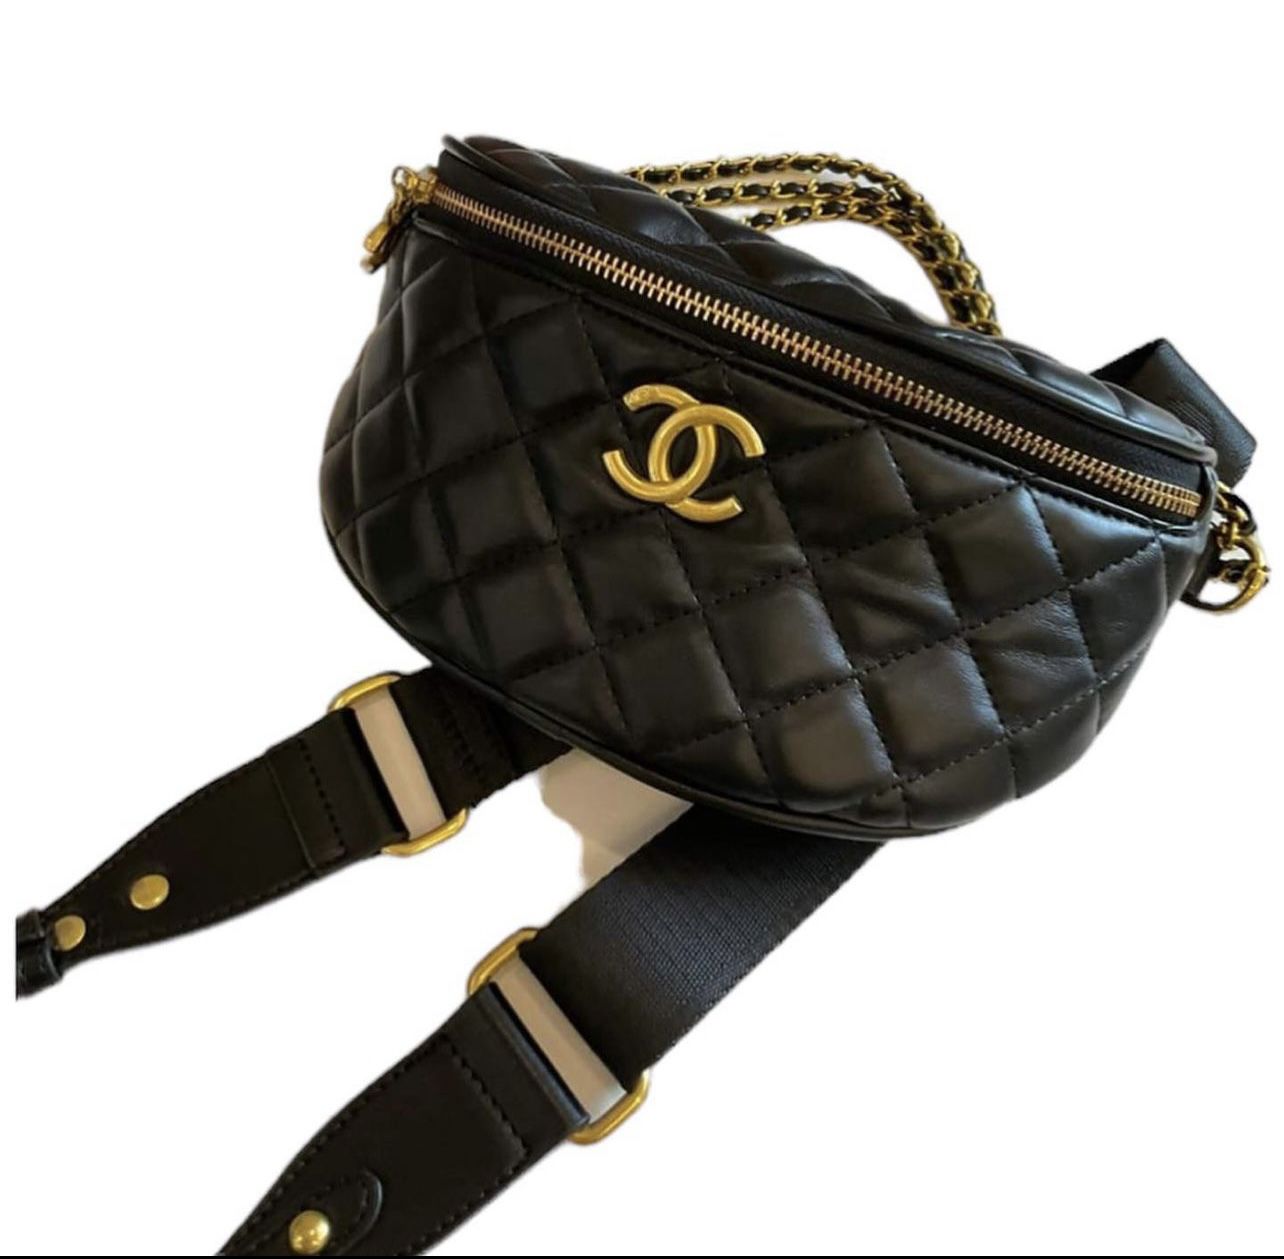 Chanel Fanny Pack Bum Bag for Sale in Boston, MA - OfferUp